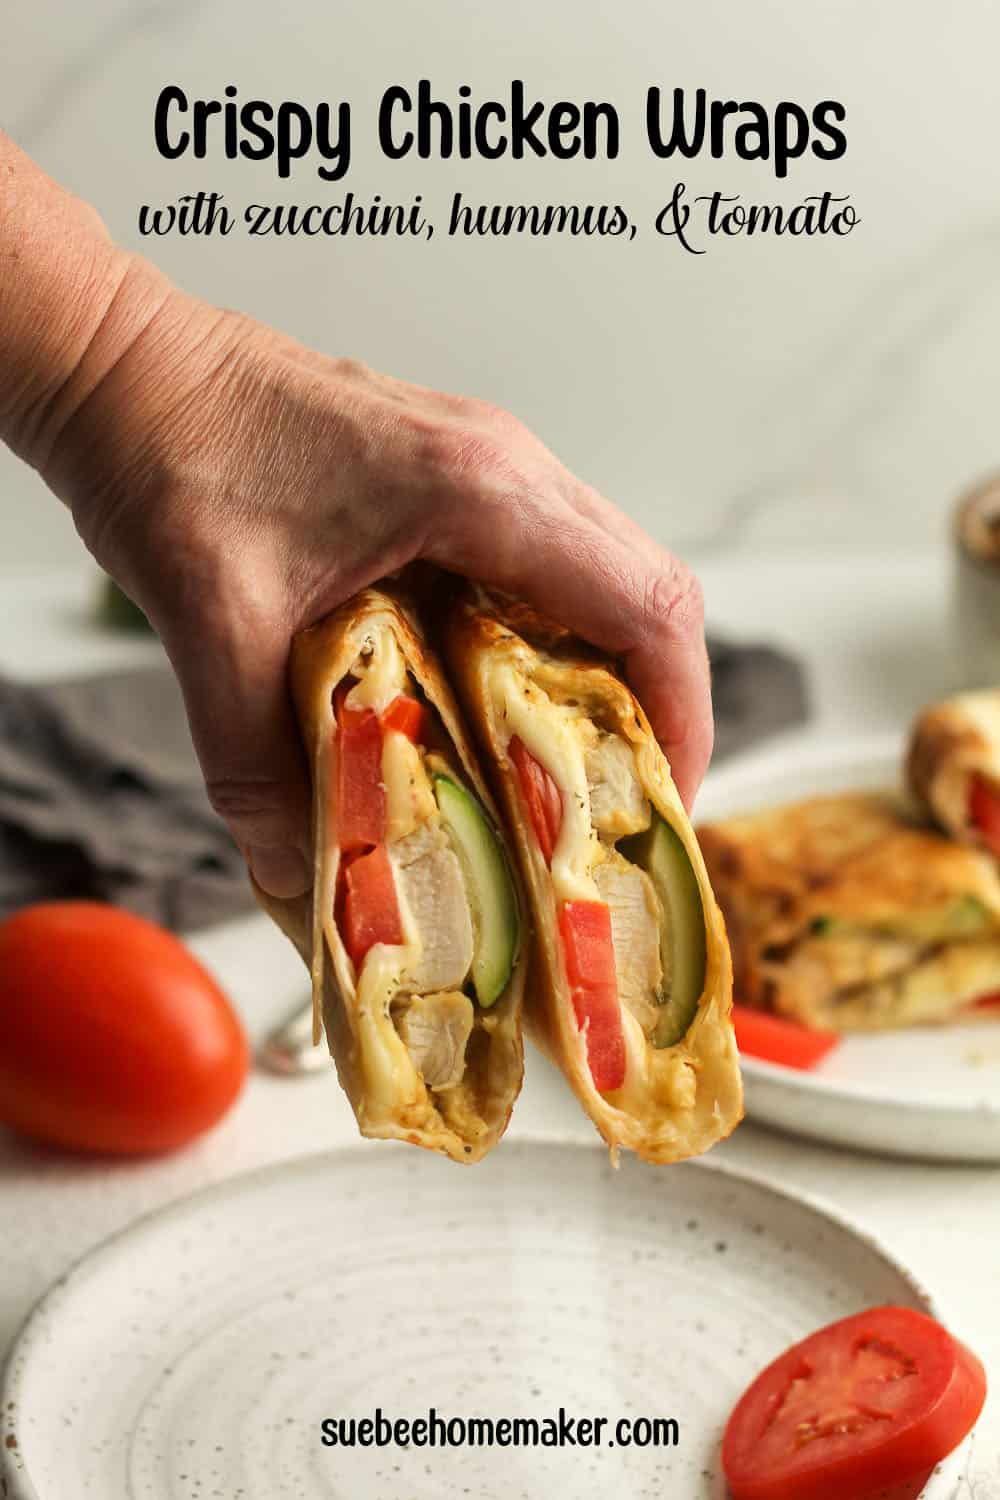 A hand holding a crispy chicken wrap with zucchini and tomato.